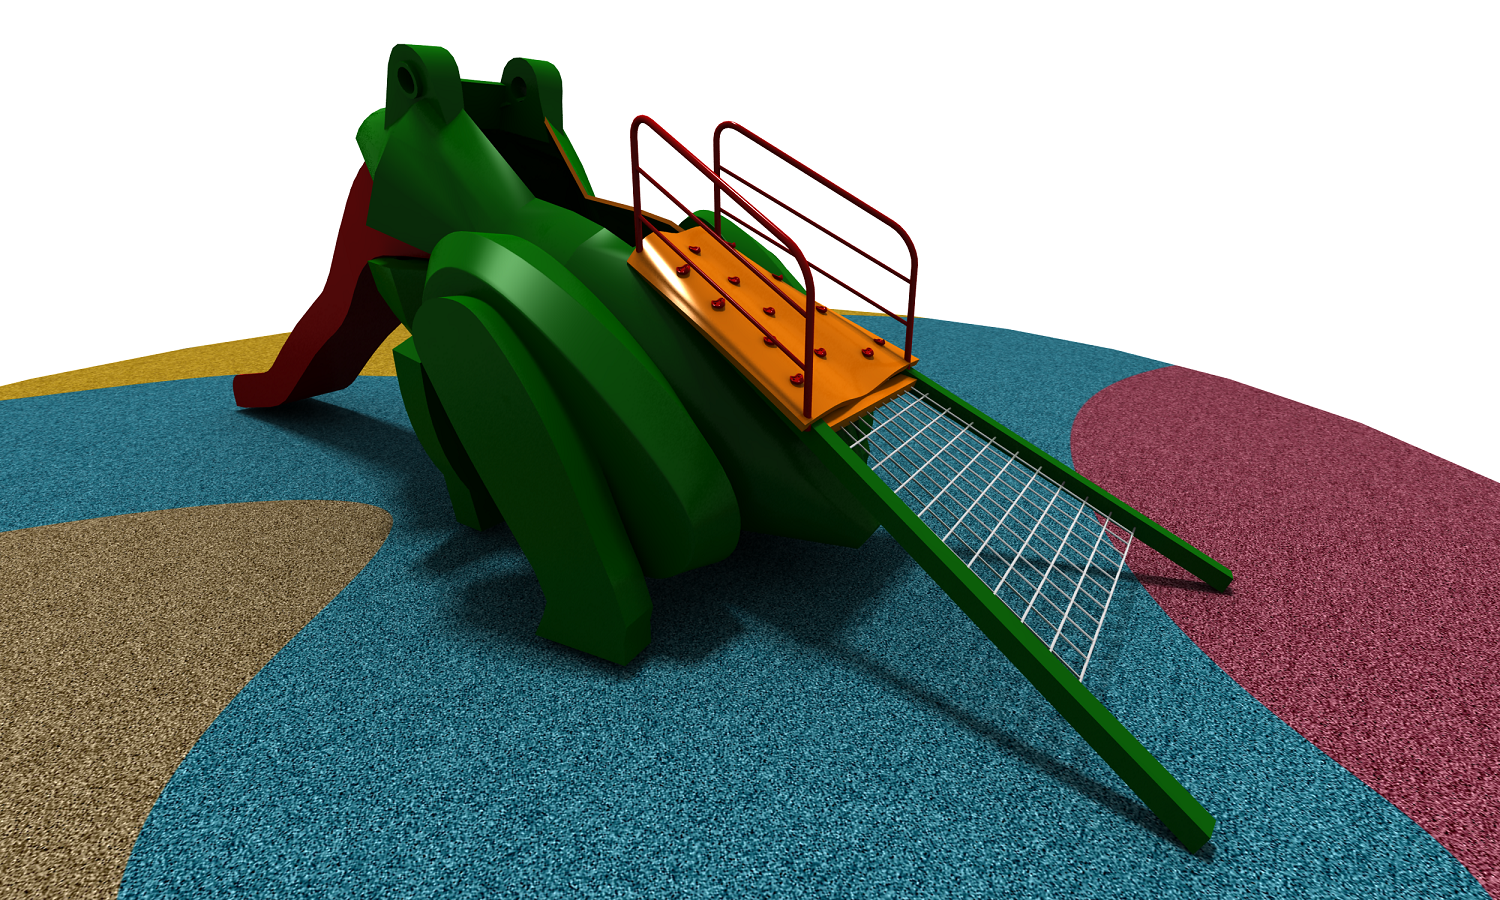 Frog Non-standard Outdoor Playground with Slides